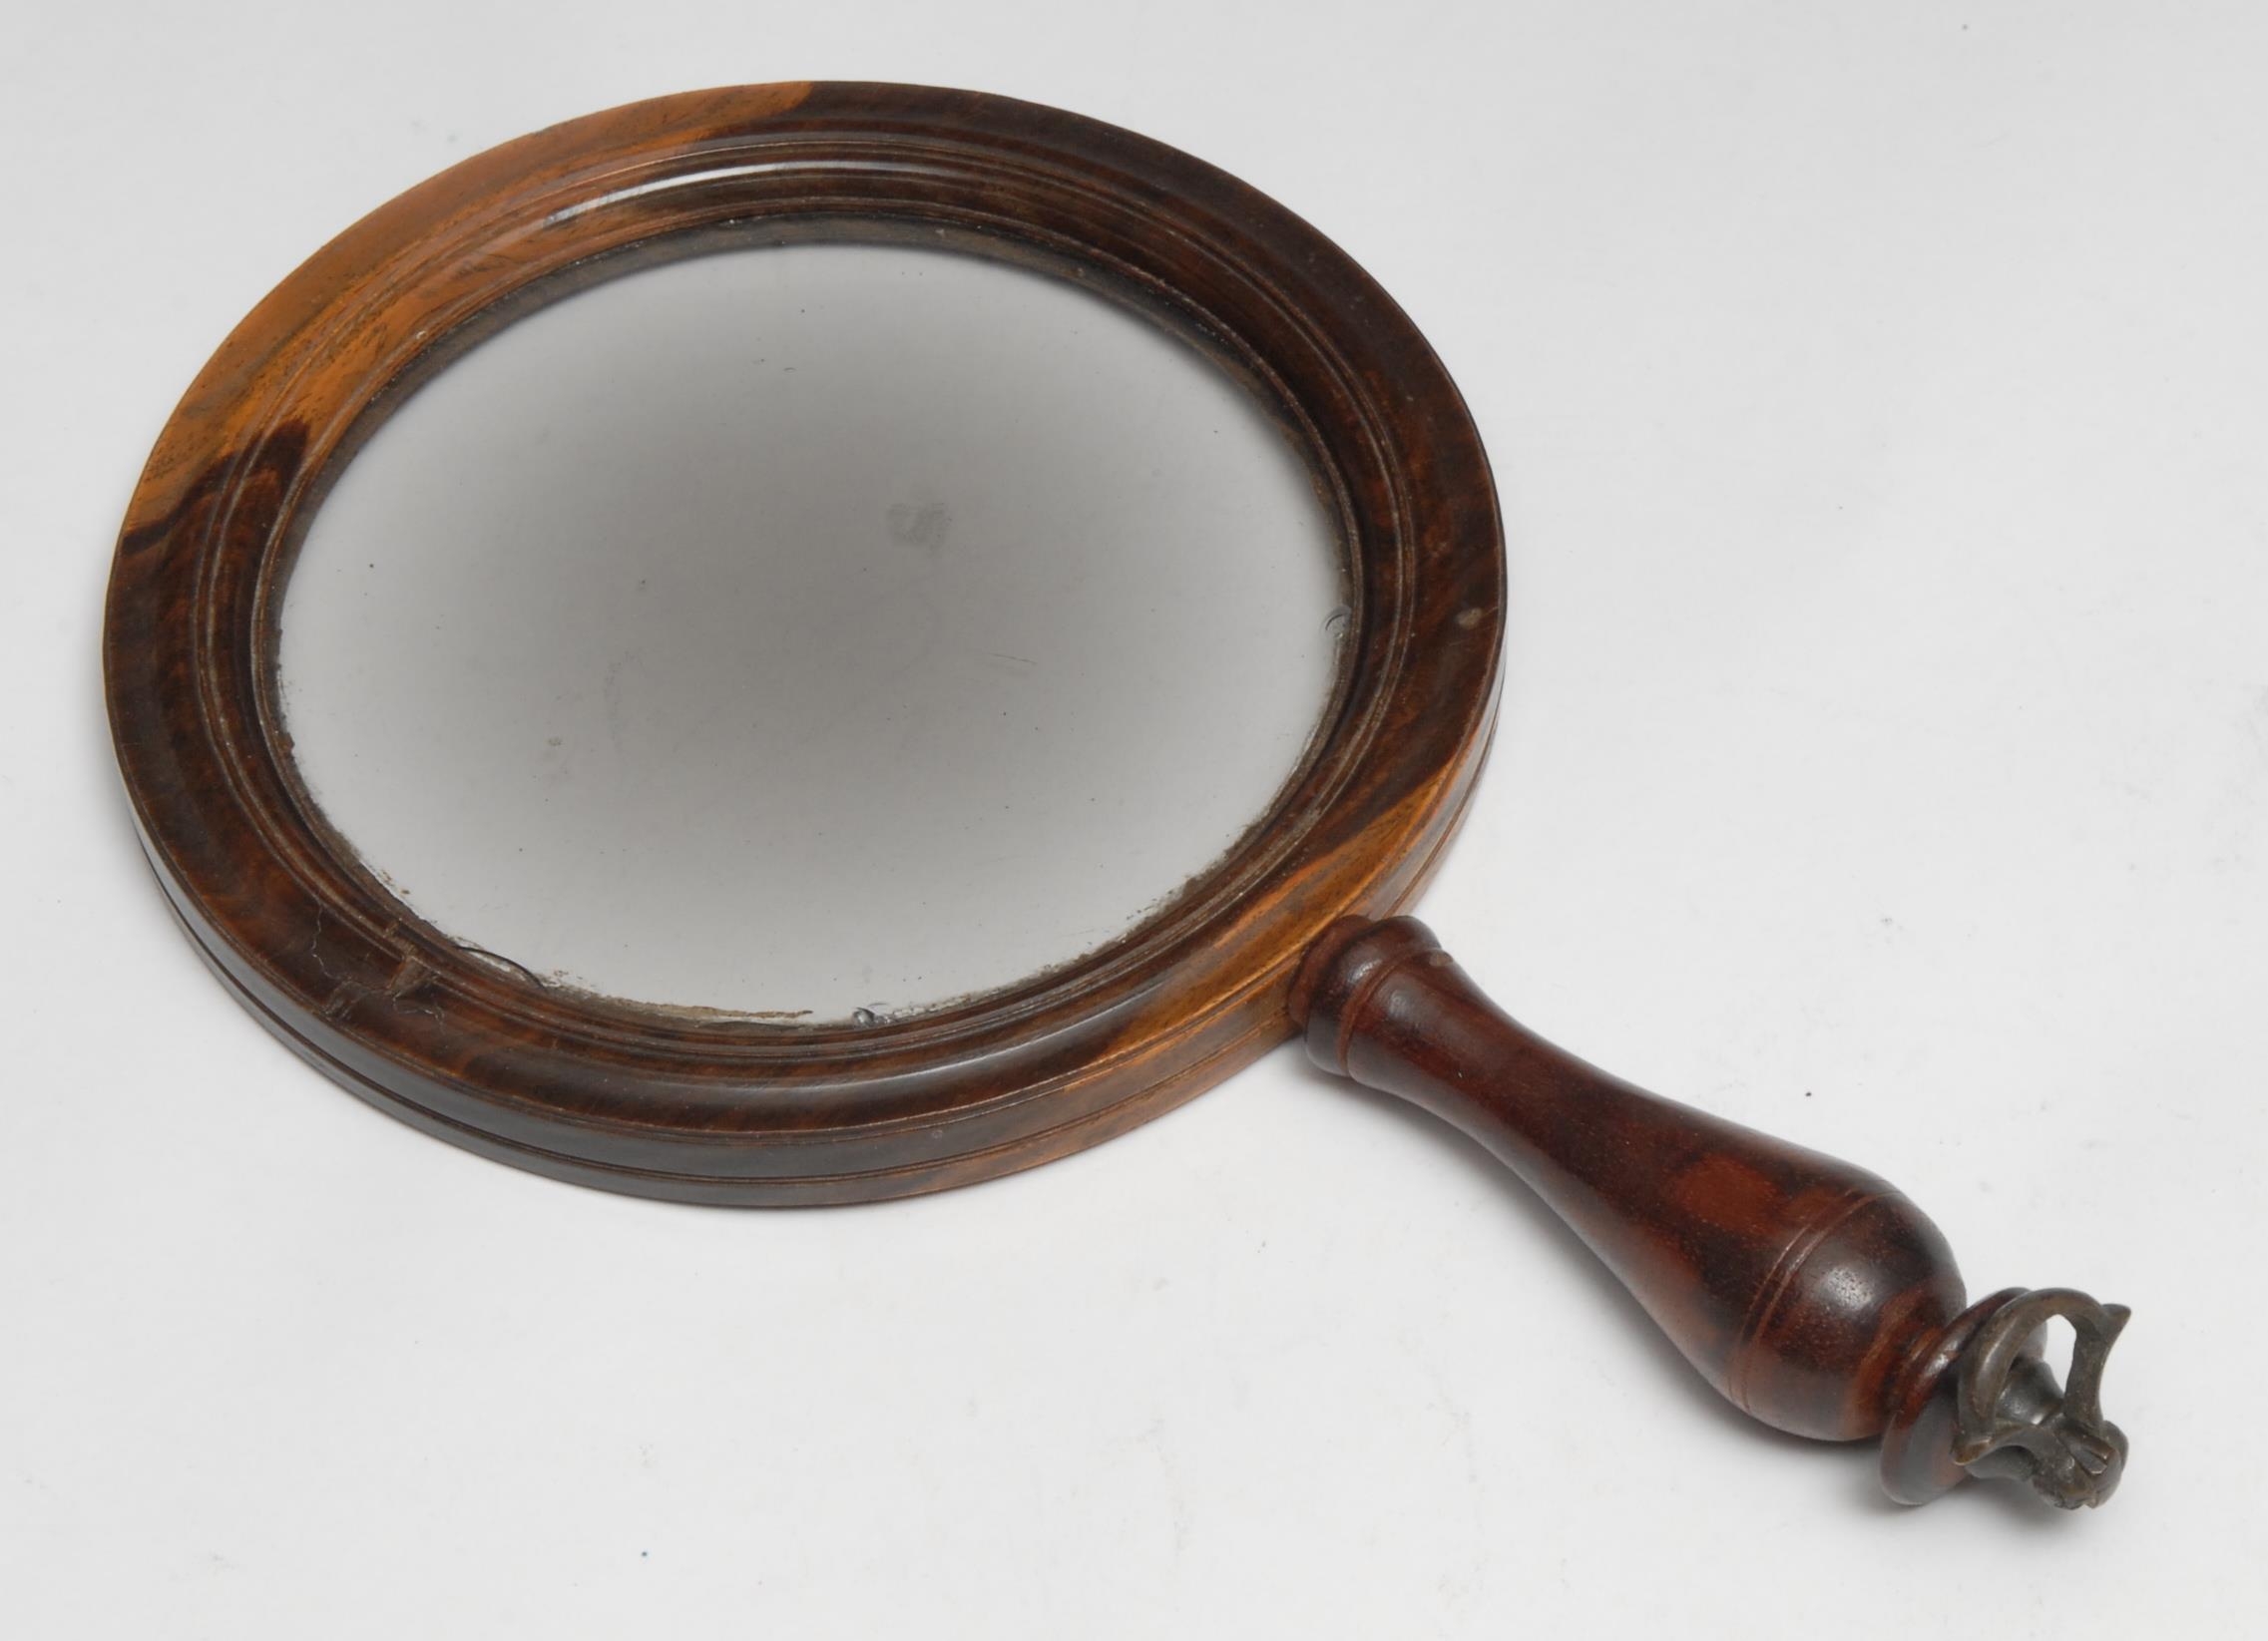 A 19th century lignum vitae connoisseur's lens, circular magnifying glass, turned handle with